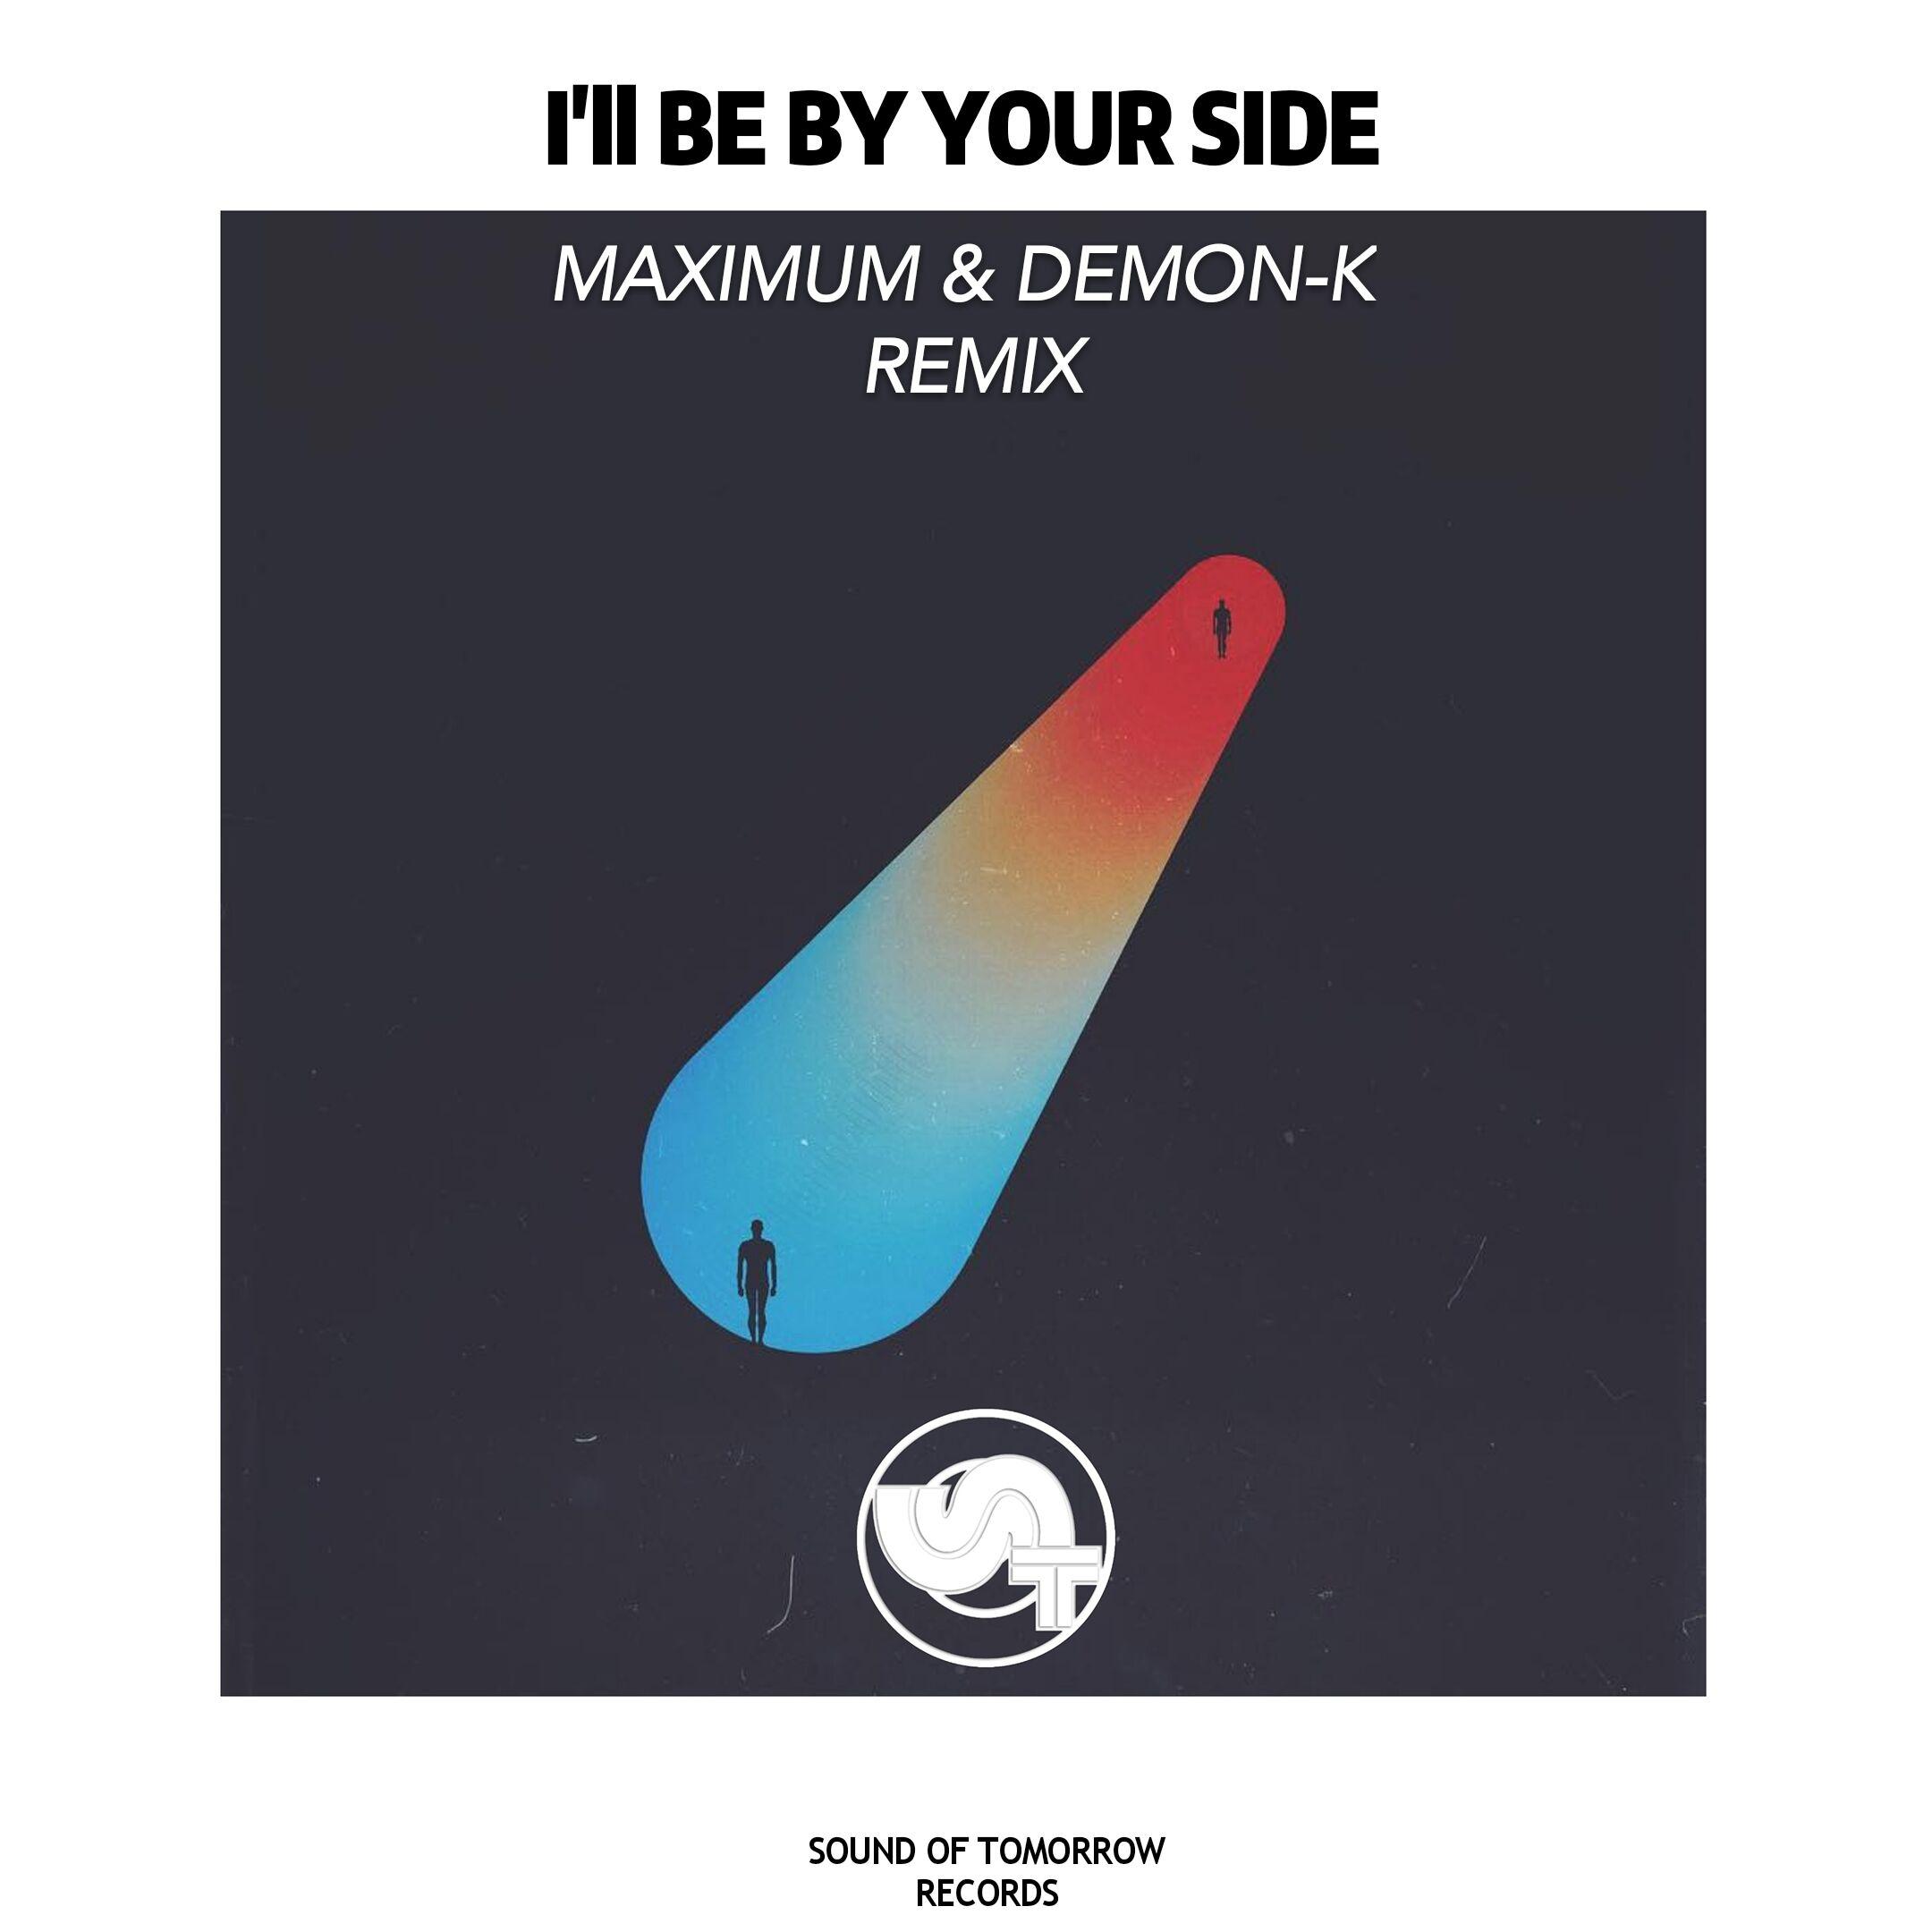 I'll BE BY YOUR SIDE(MAXIMUM & DEMON-K REMIX)